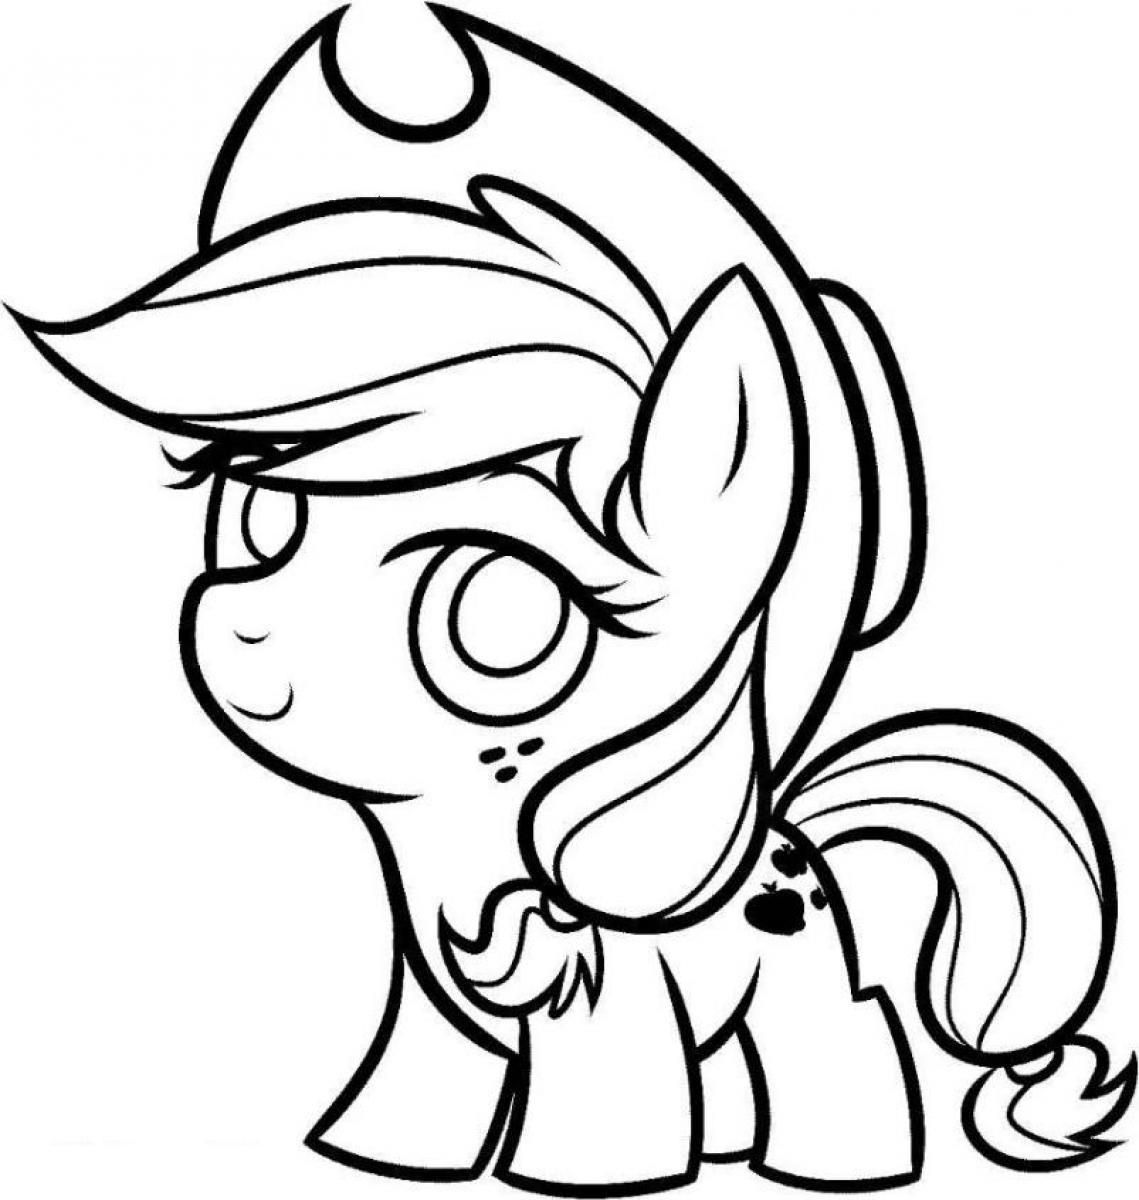 Mlp baby pony coloring pages ✿ my little pony coloring book twilight  sparkle and babies | Dong.holliefindlaymusic.com